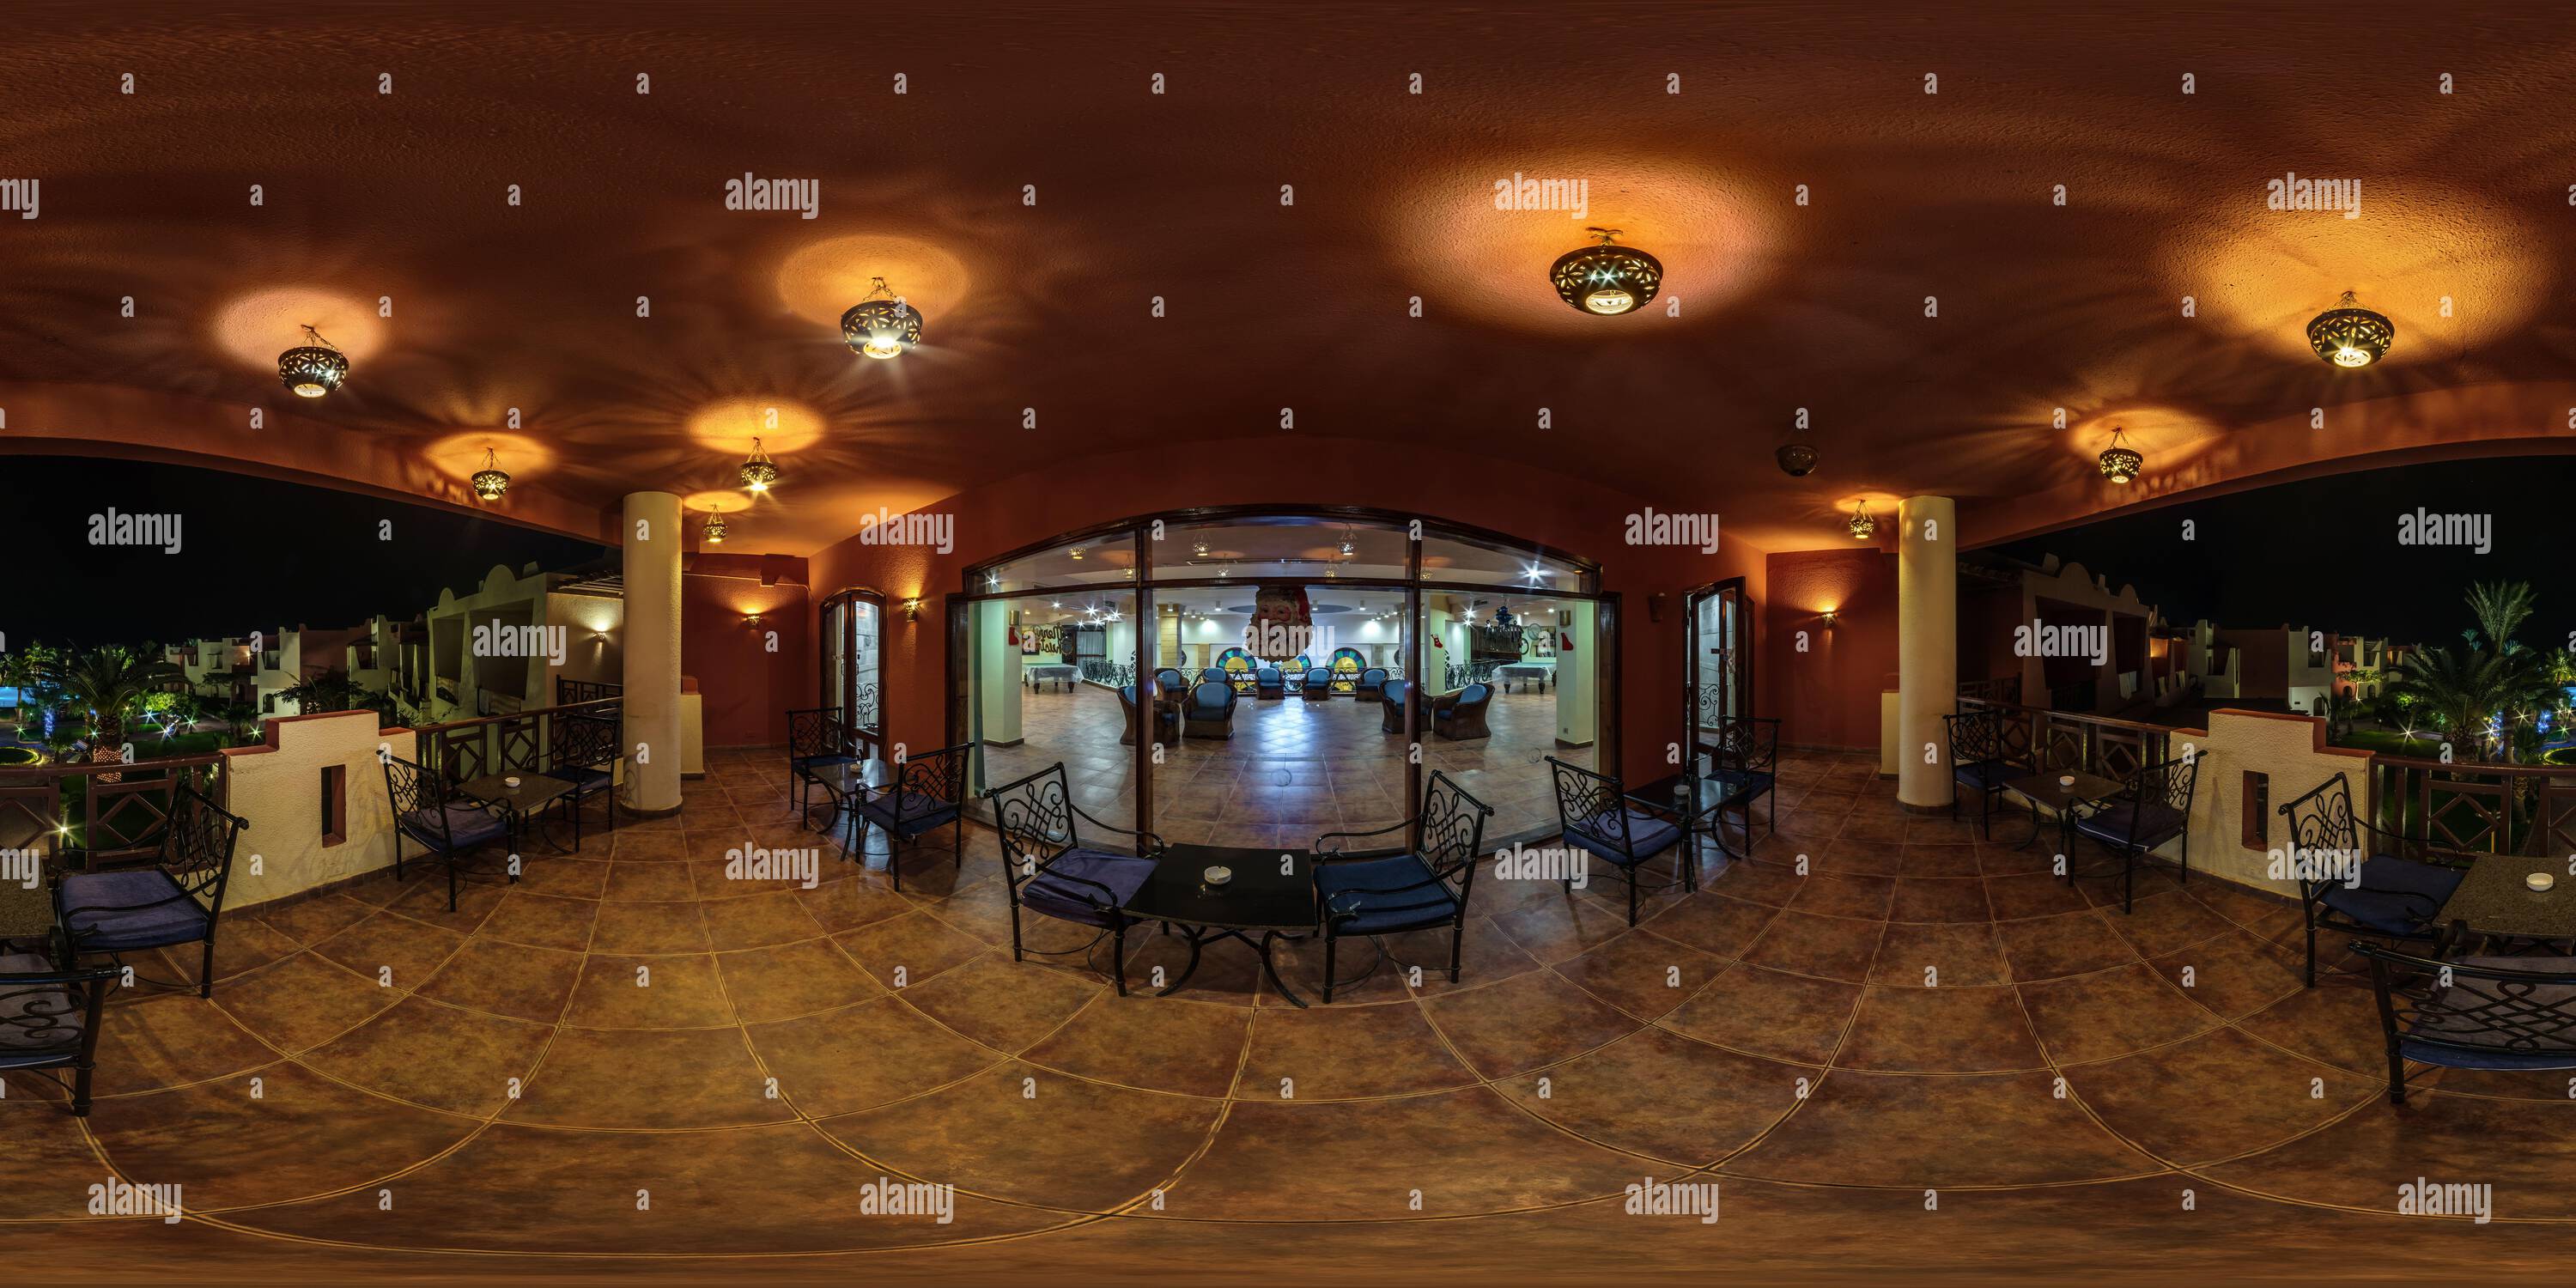 360 degree panoramic view of DAHAB, EGYPT - DECEMBER 2021: full seamless spherical hdr night 360 panorama view on second floor of balcony or terrace overlooking palm trees in equi